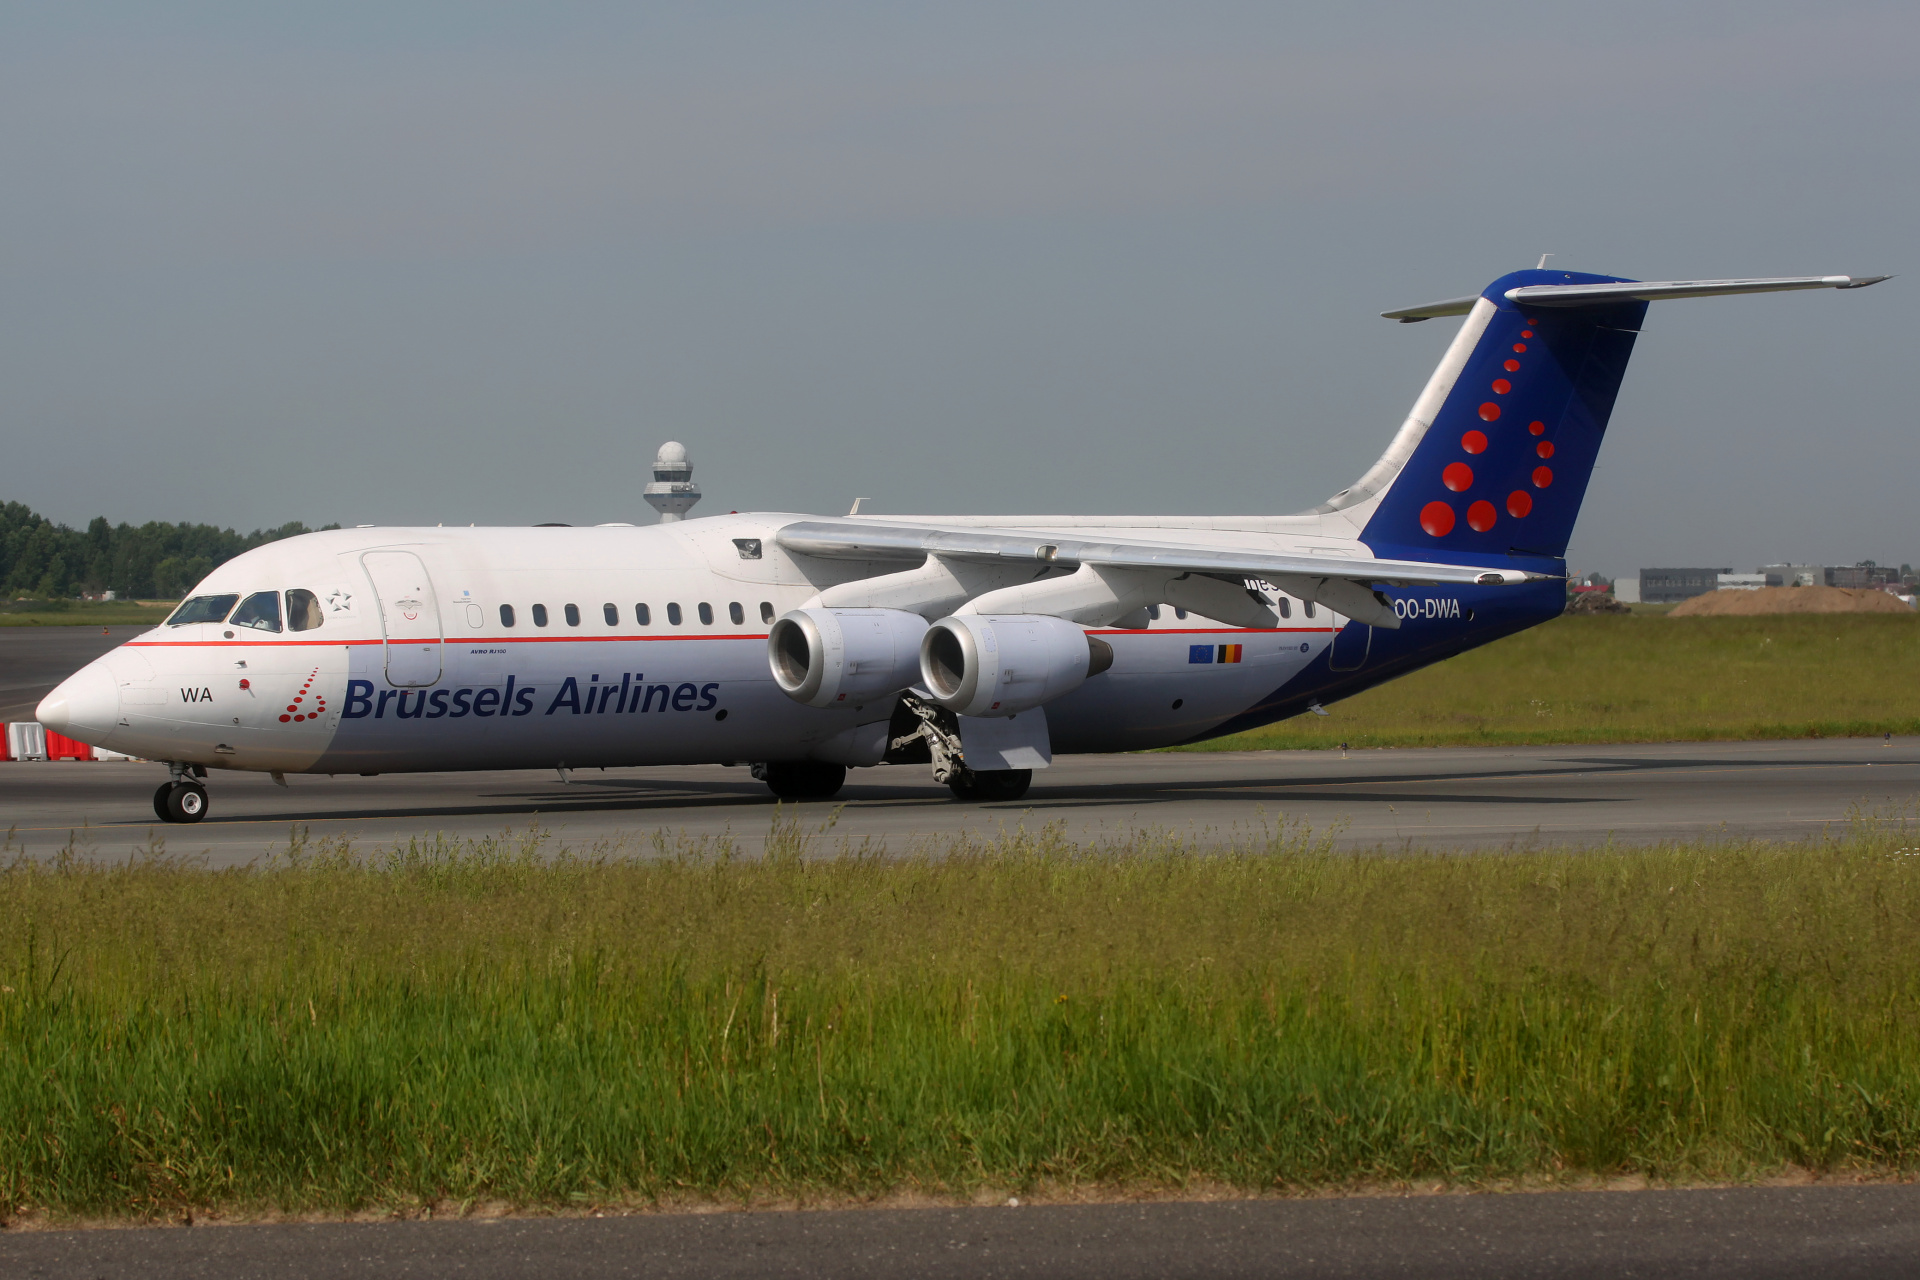 OO-DWA (Aircraft » EPWA Spotting » BAe 146 and revisions » Avro RJ100 » Brussels Airlines)